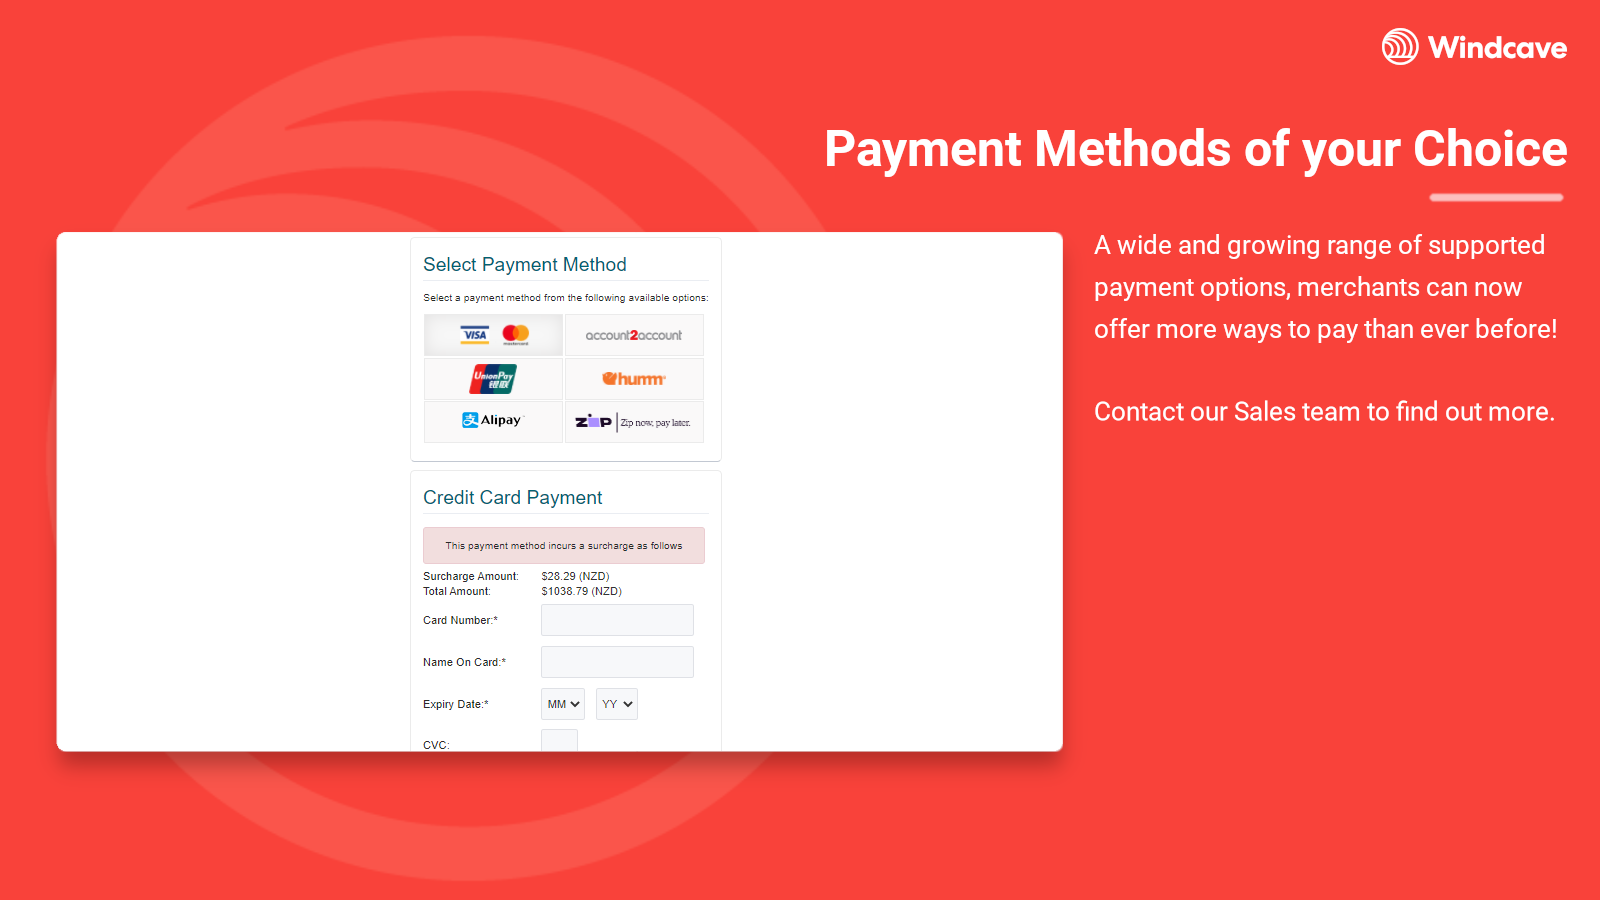 Payment Methods of your Choice